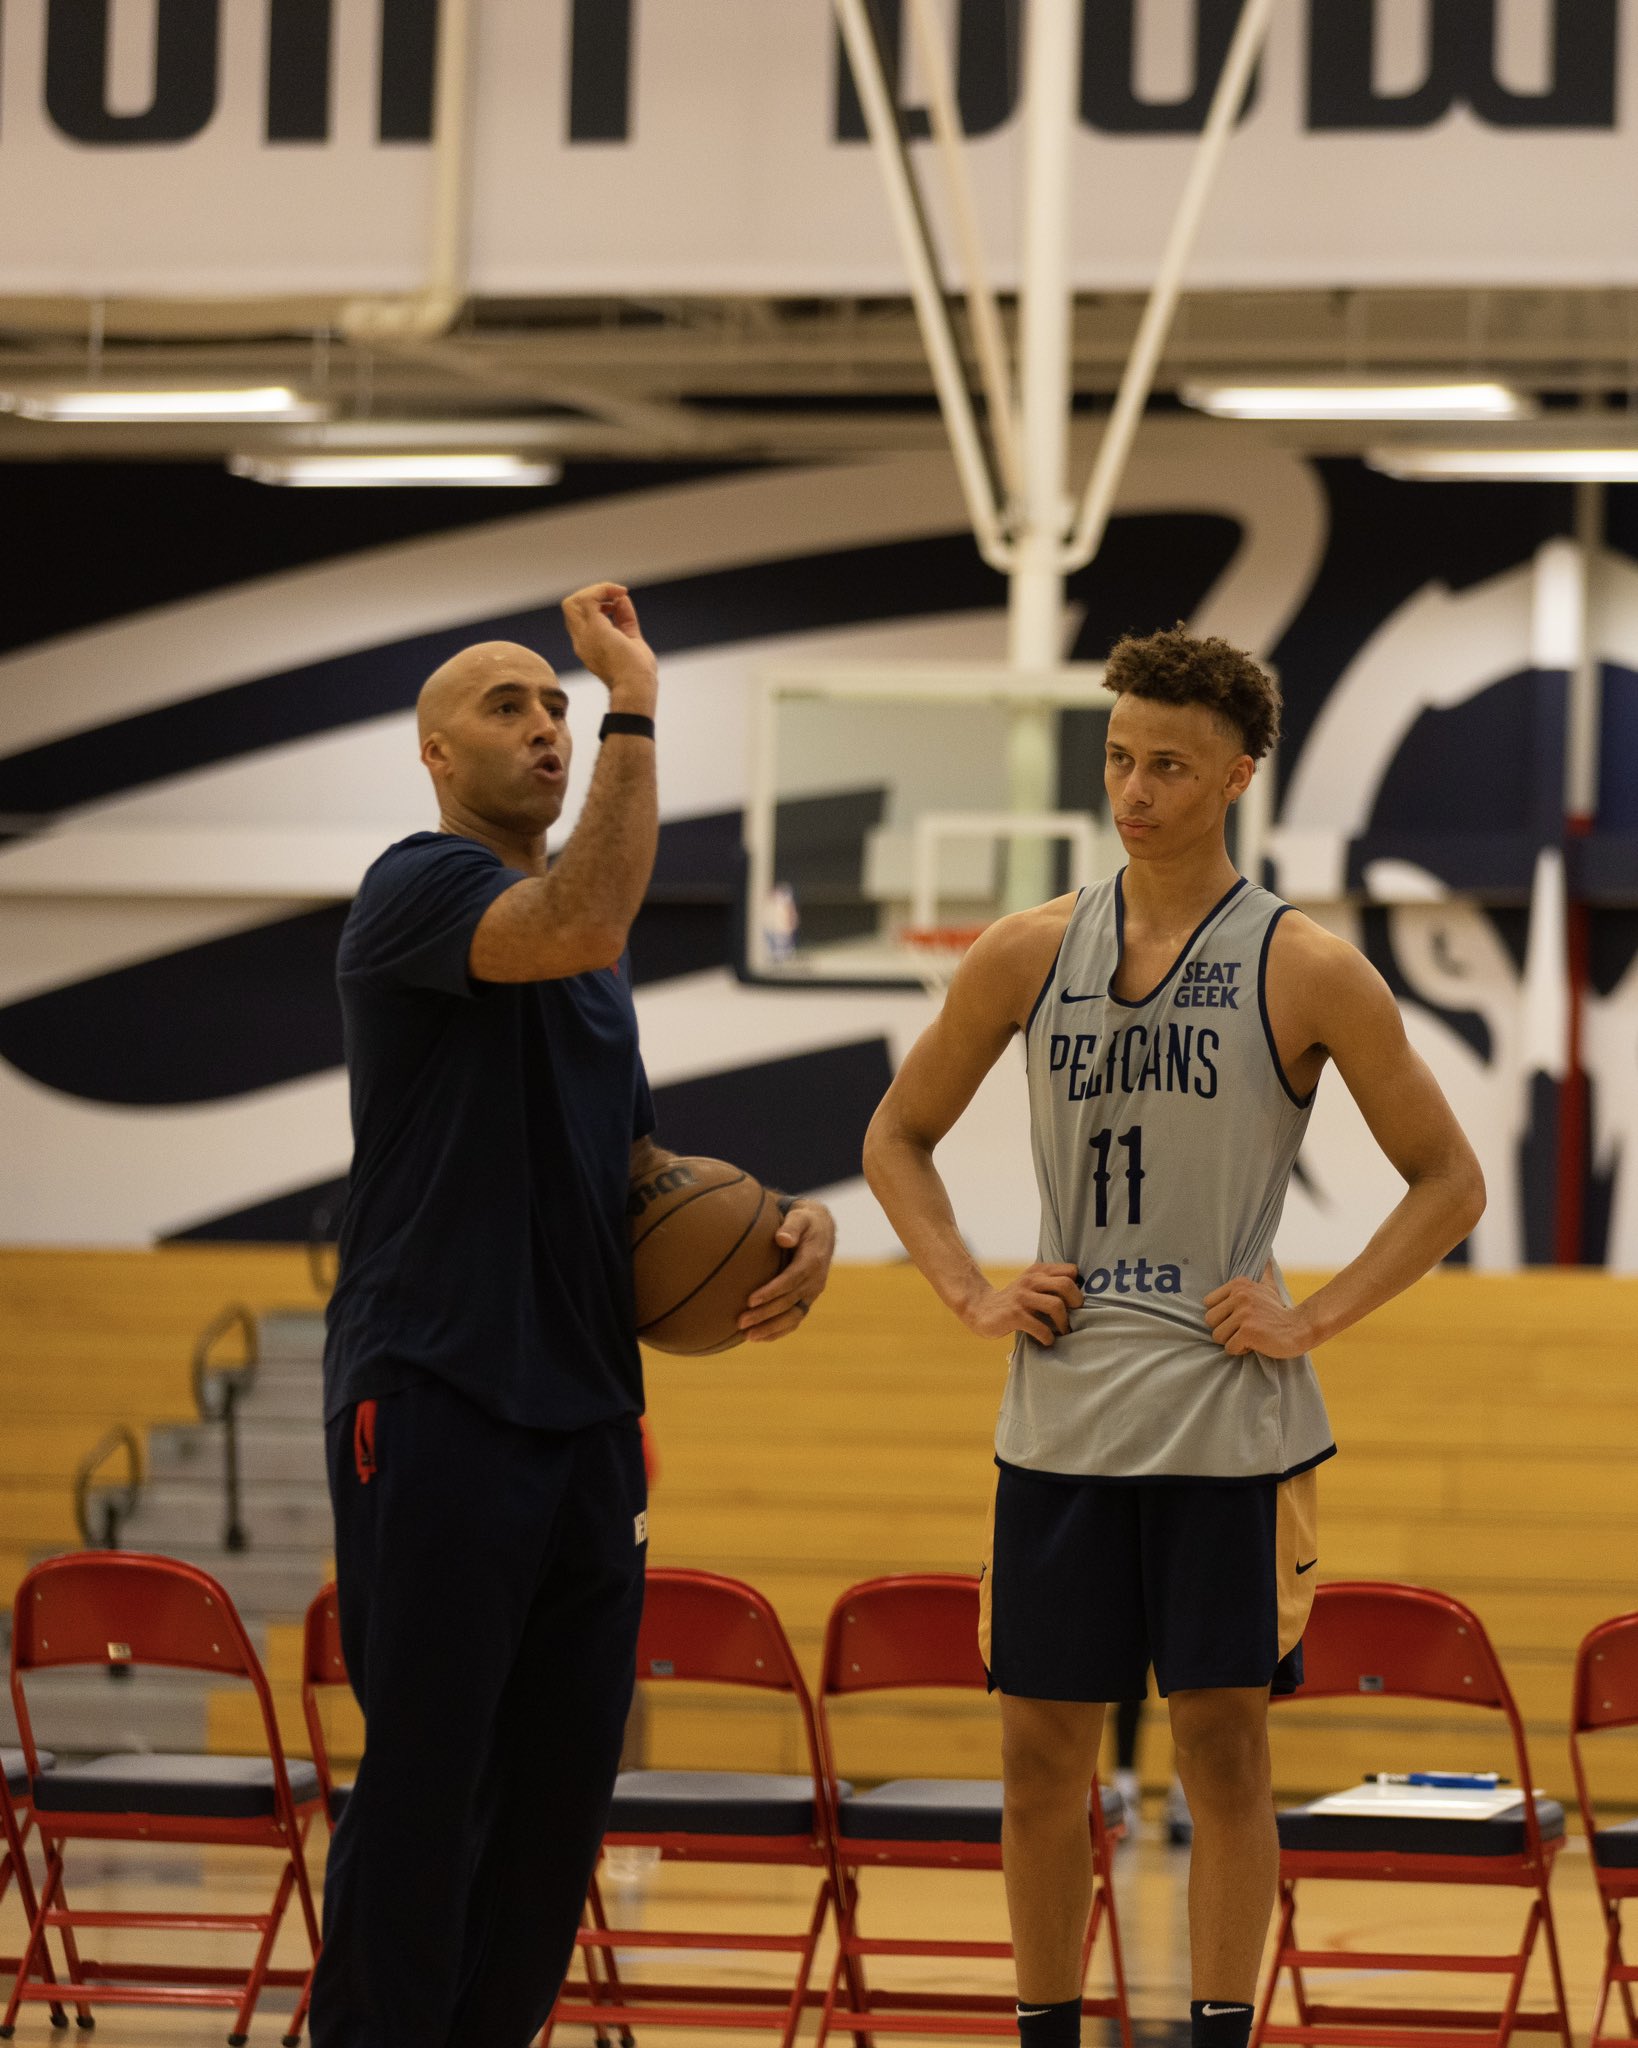 New Orleans Pelicans on Twitter: "Learning from the best 🎯 https://t.co/tUQ38soUZk" / Twitter